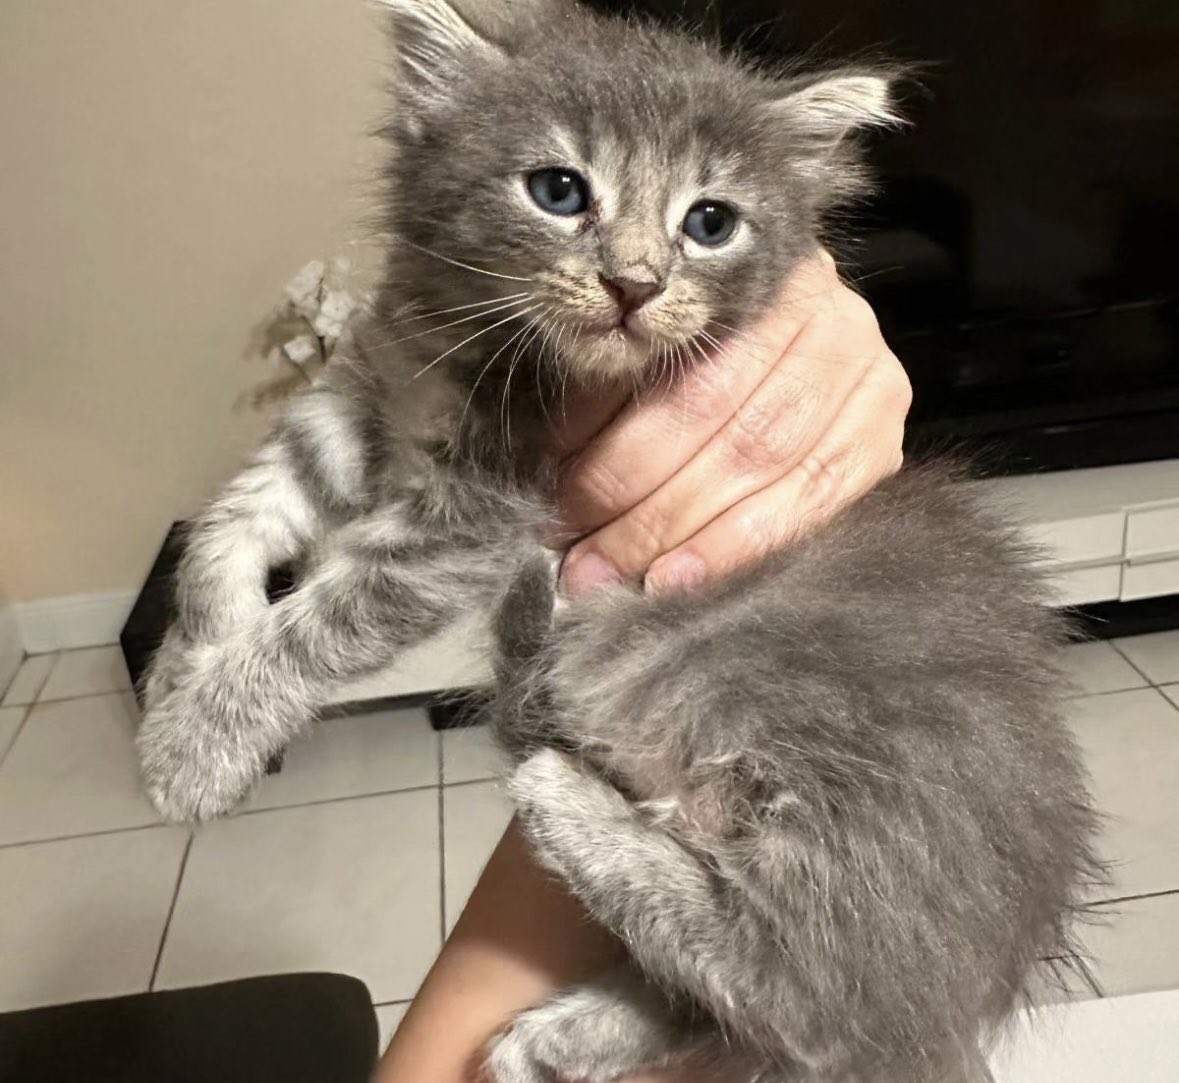 Dolly is our 6 week old female kitty! 💗🐾 DM us to adopt any of our available pets!🫶🏽#AnimalLoverRescue #rescuestory #animalrescue #adoptdontshop #rescue #animals #animallovers #animalsanctuary #animalrights #dogs #cats #rescuedog #kittenrescue #fosteringsaveslives #adoptme